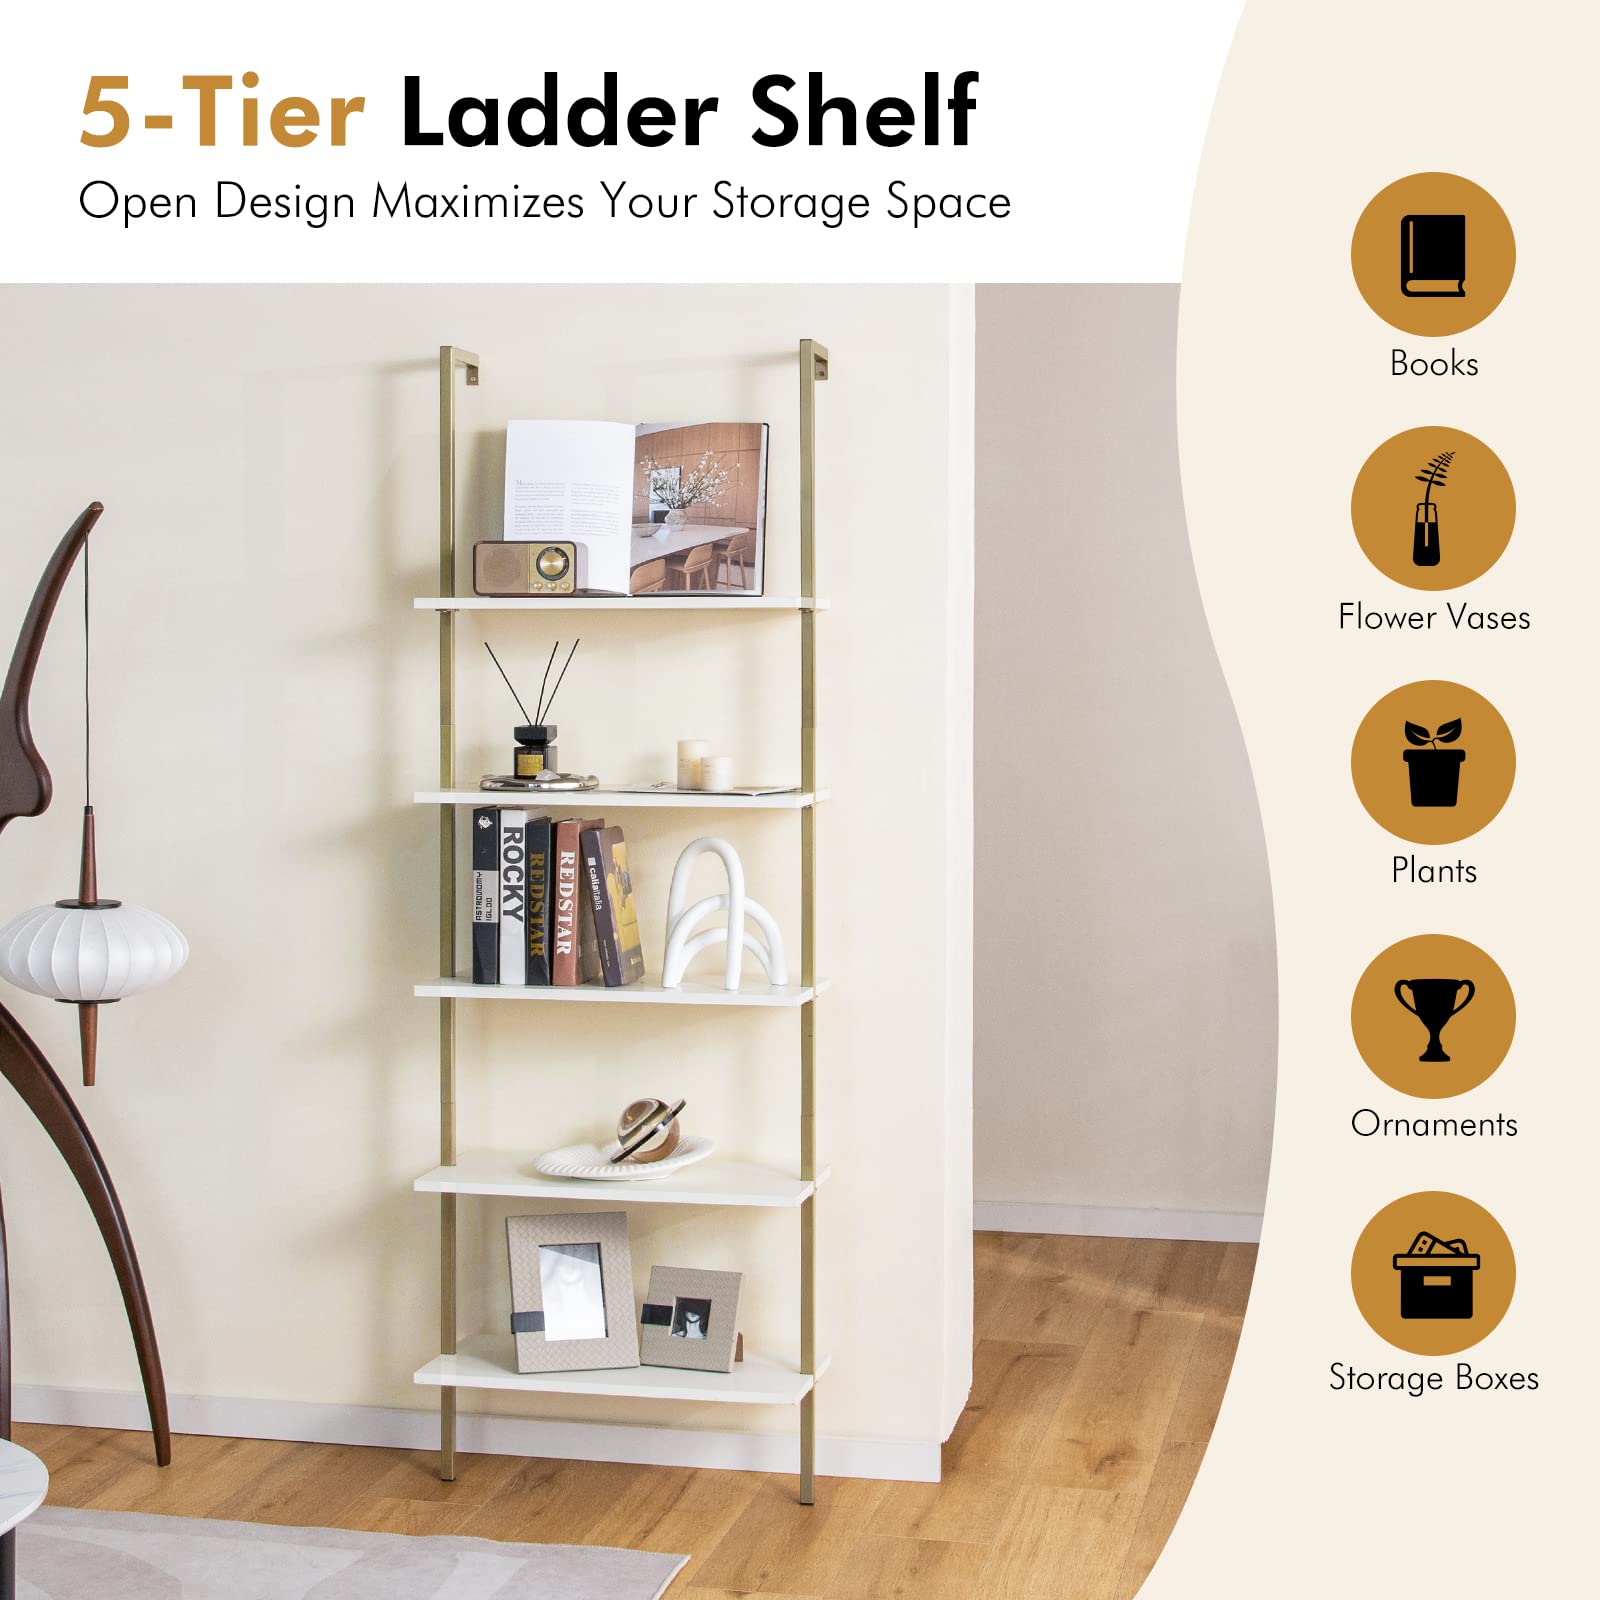 Giantex 5 Tier Modern Wall Mounted Bookshelf, 71'' White and Gold Wood Bookcase with Steel Frame